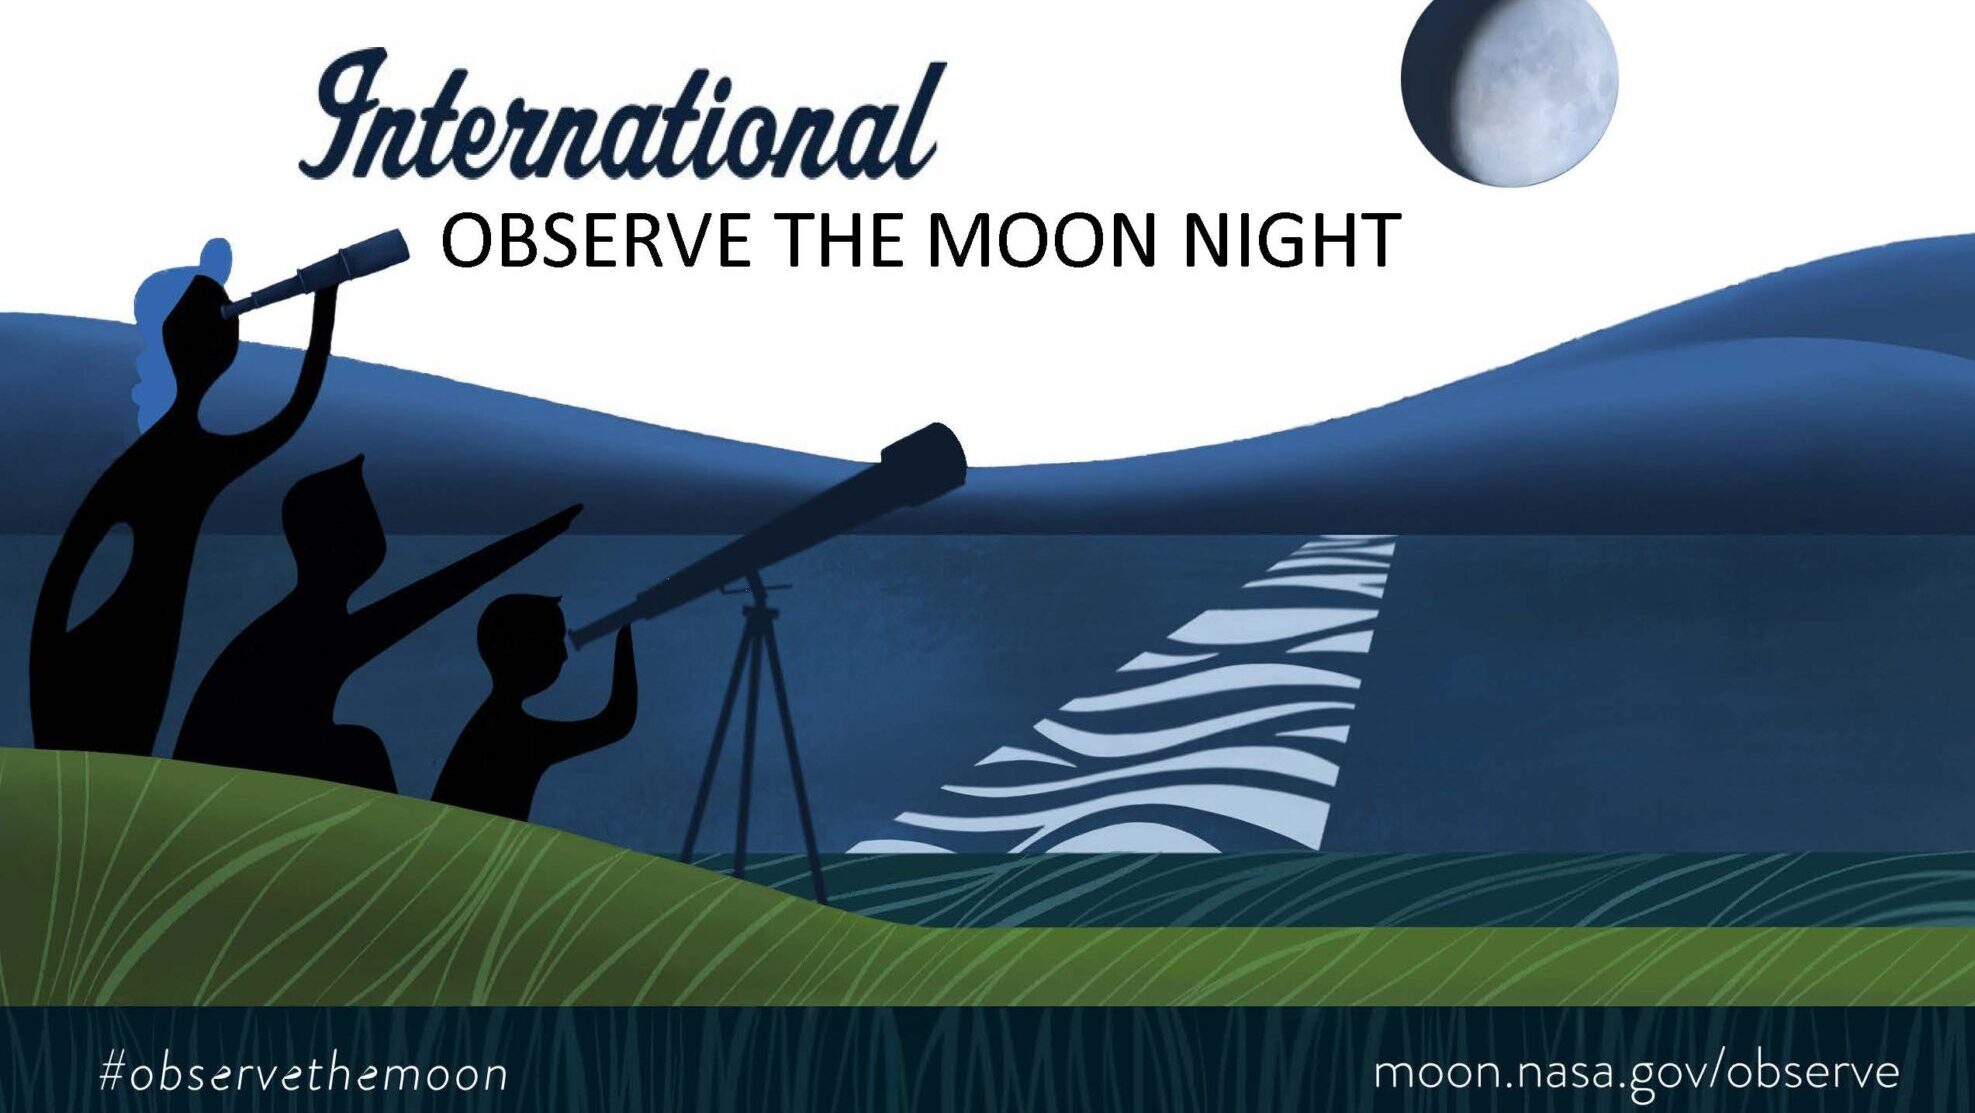 a flyer for the International Observe the Moon Night